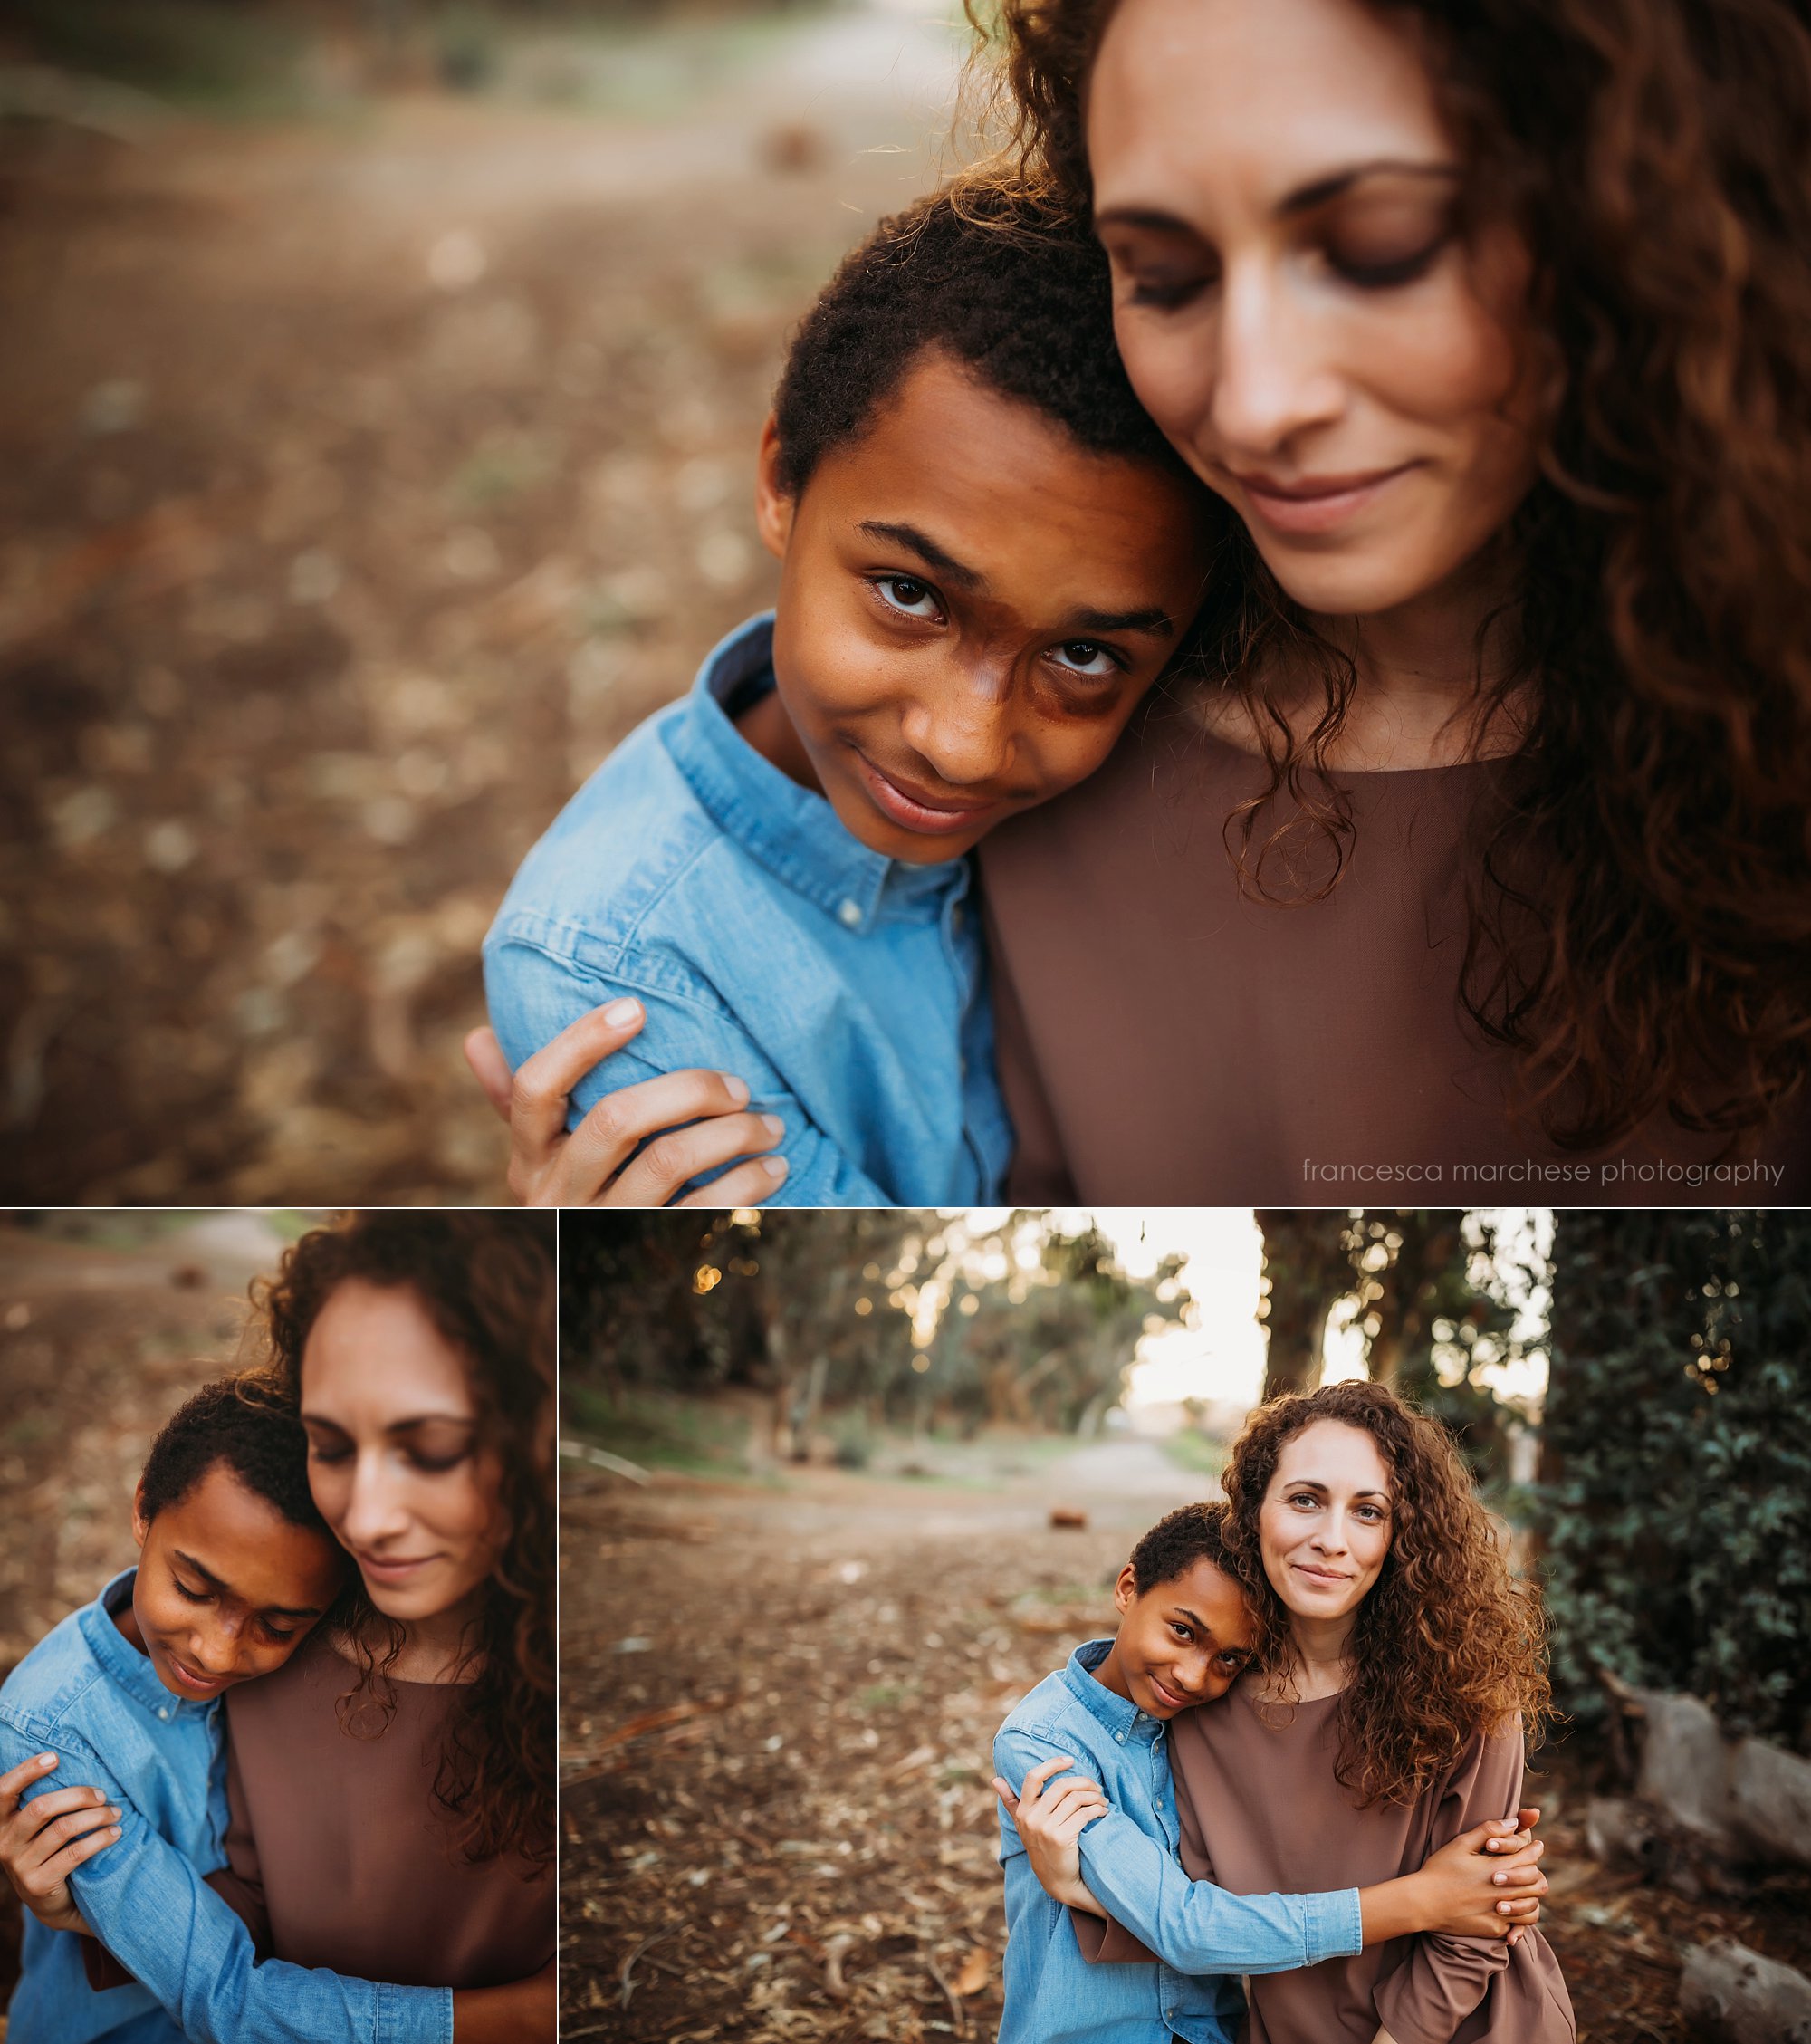 Francesca Marchese Photography motherhood photography session mother and teen son